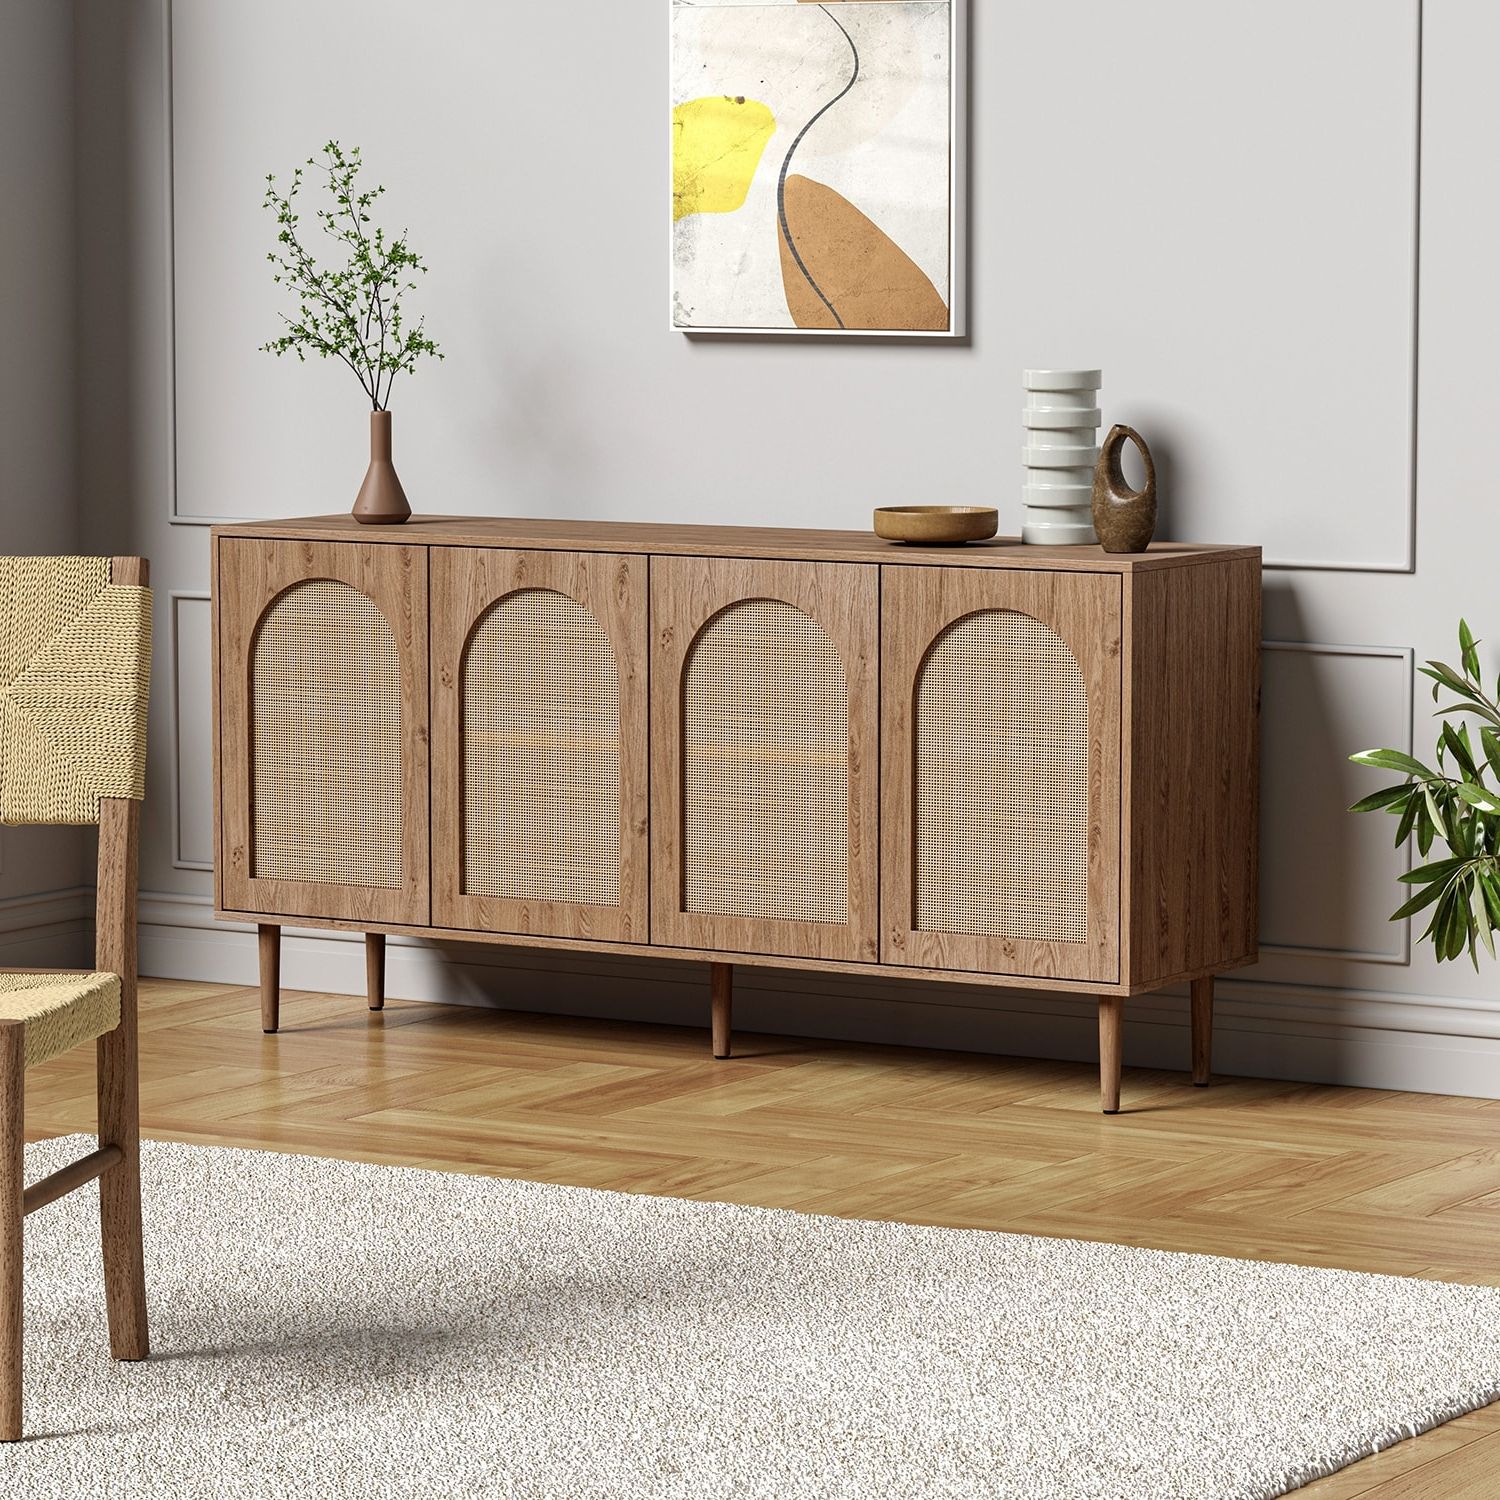 Uirico Multifunctional Buffet Sideboard Cabinet With Rattan Design Hulala Home – On Sale – Bed Bath & Beyond – 37218719 With Assembled Rattan Buffet Sideboards (View 13 of 20)